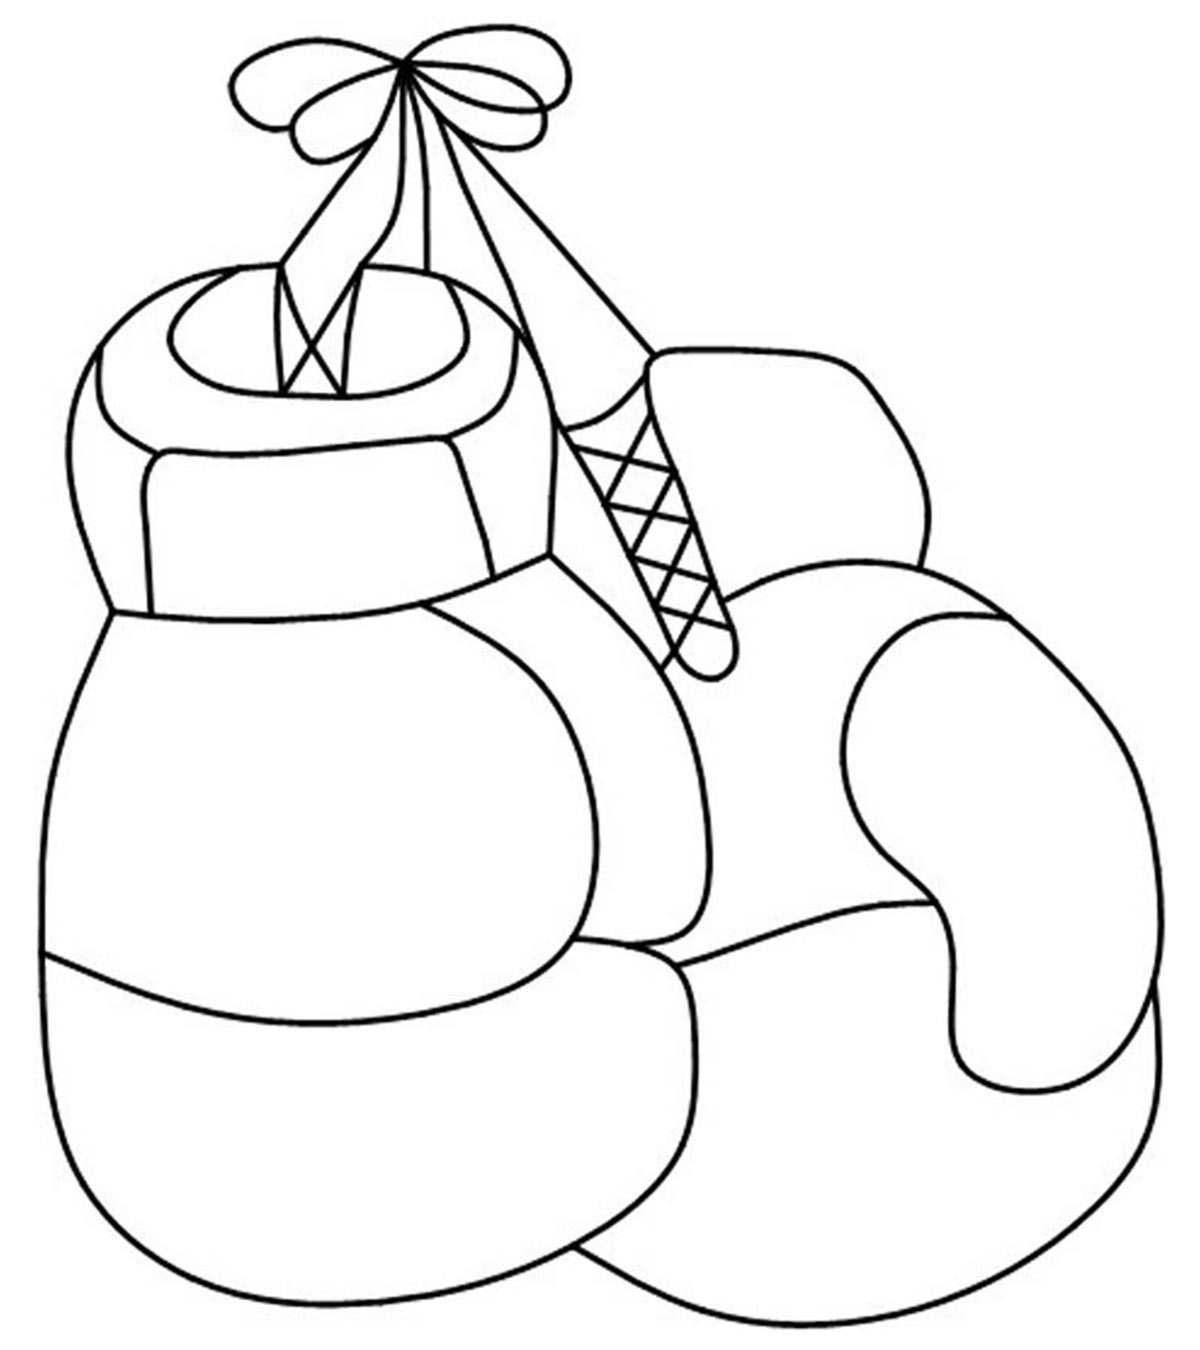 Top 10 Boxing Coloring Pages For Your Naughty Kid